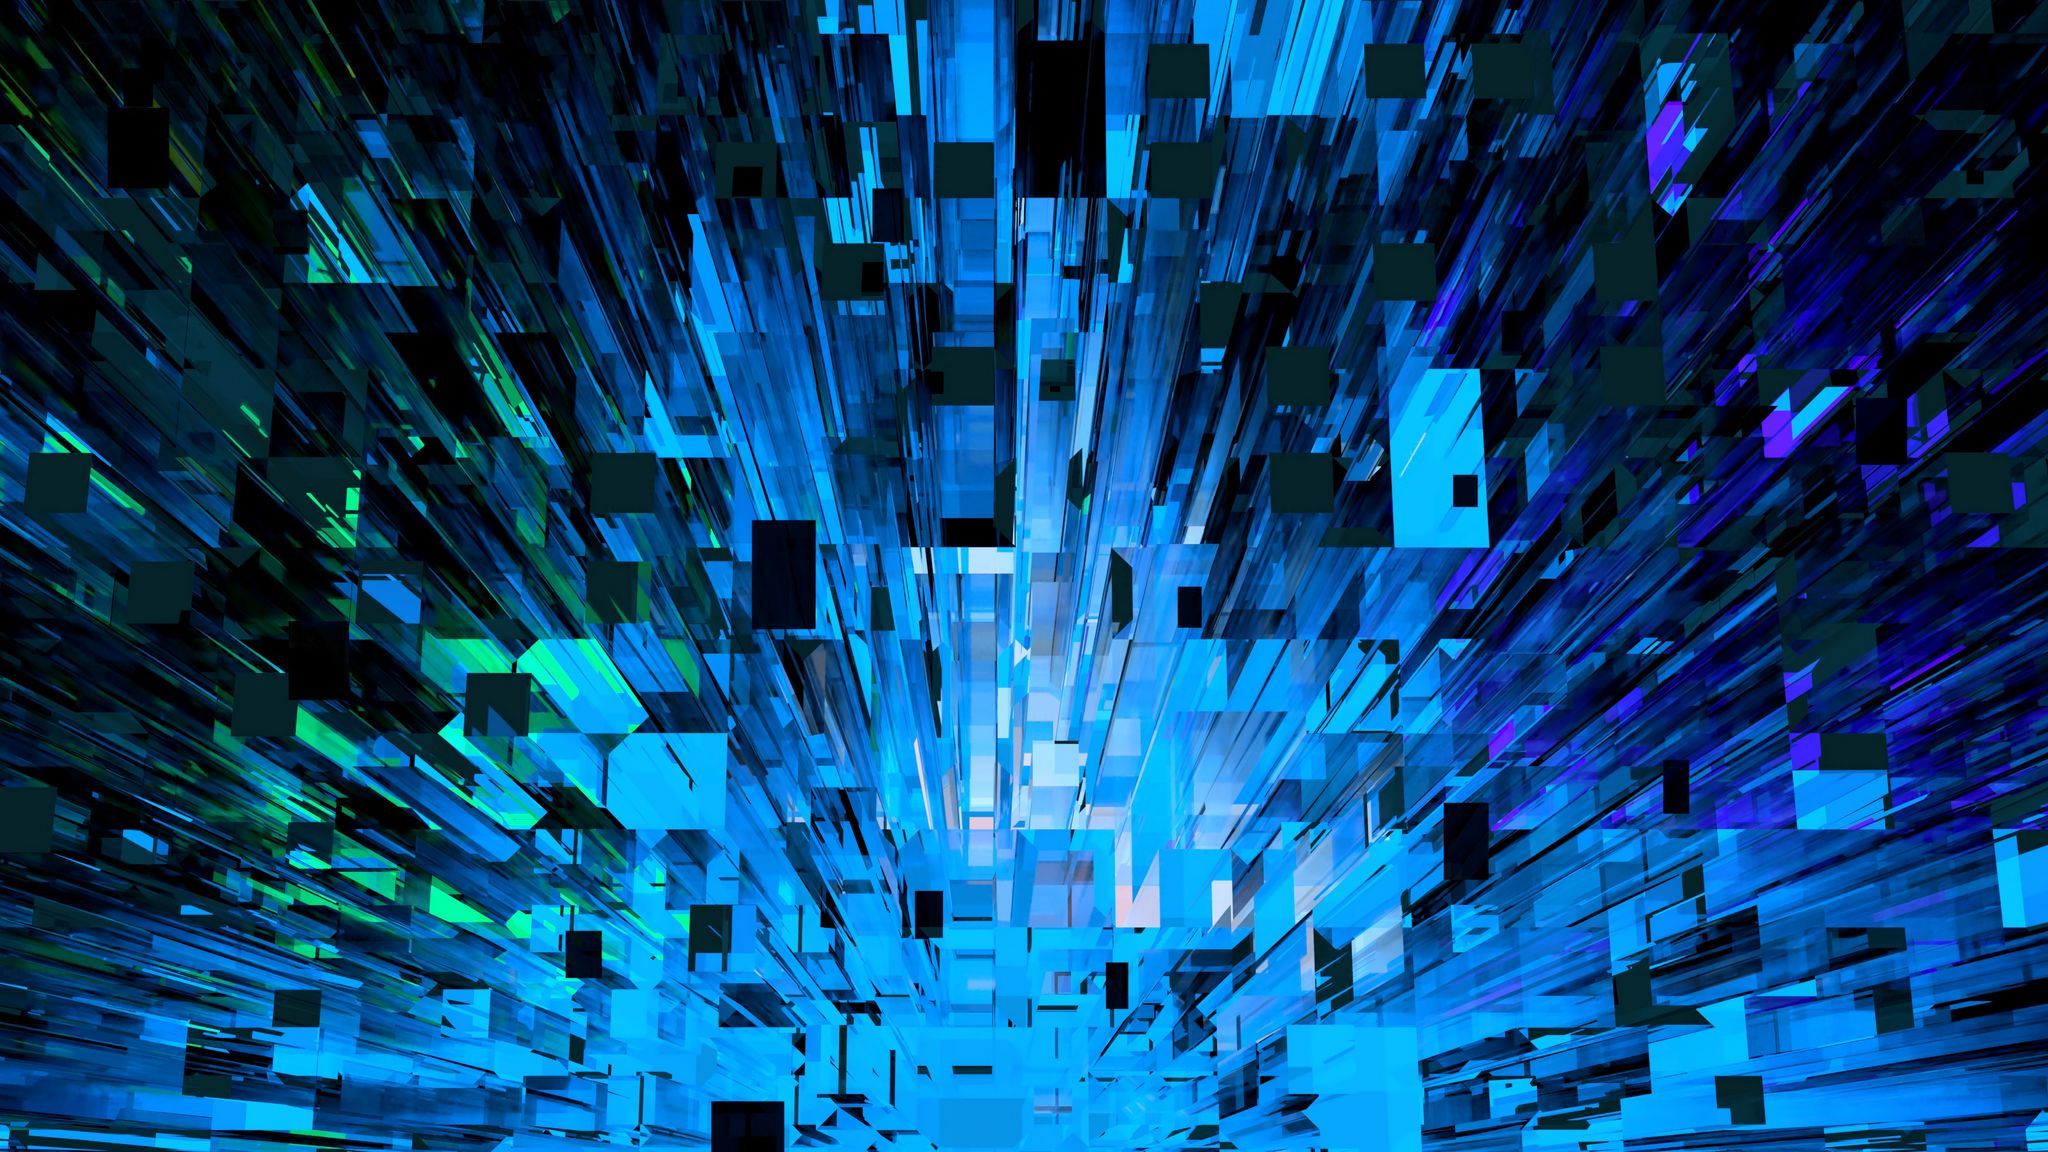 Download wallpaper 2048x1152 fragments, shards, abstraction, blue ultrawide monitor HD background